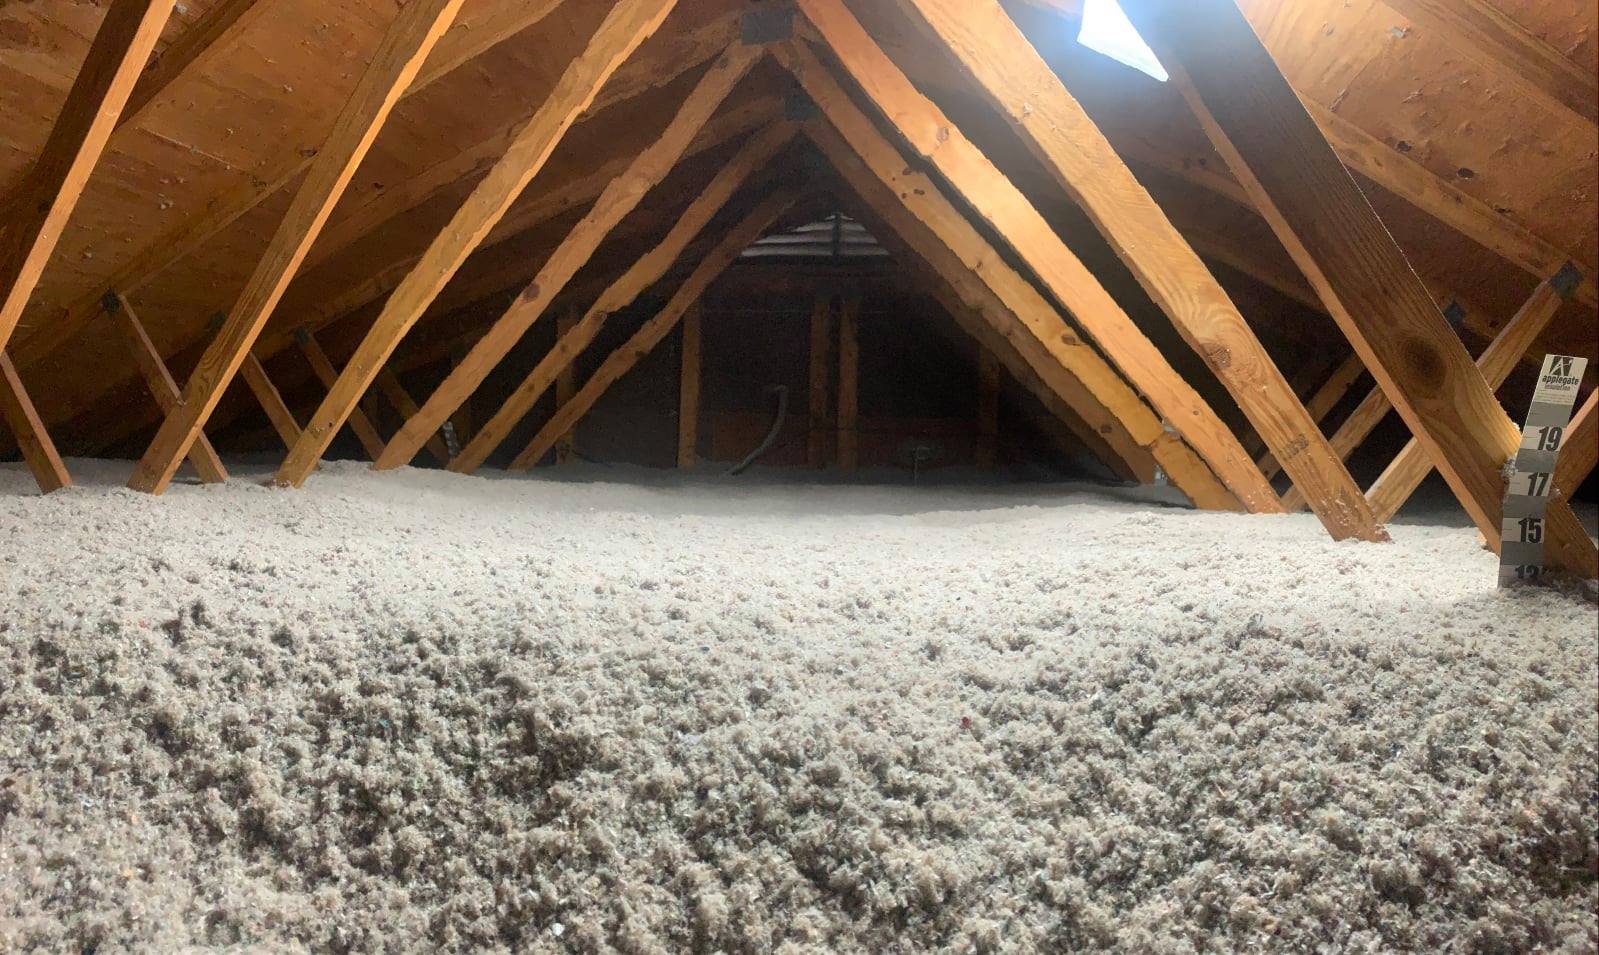 Why is insulation important for homes/buildings?